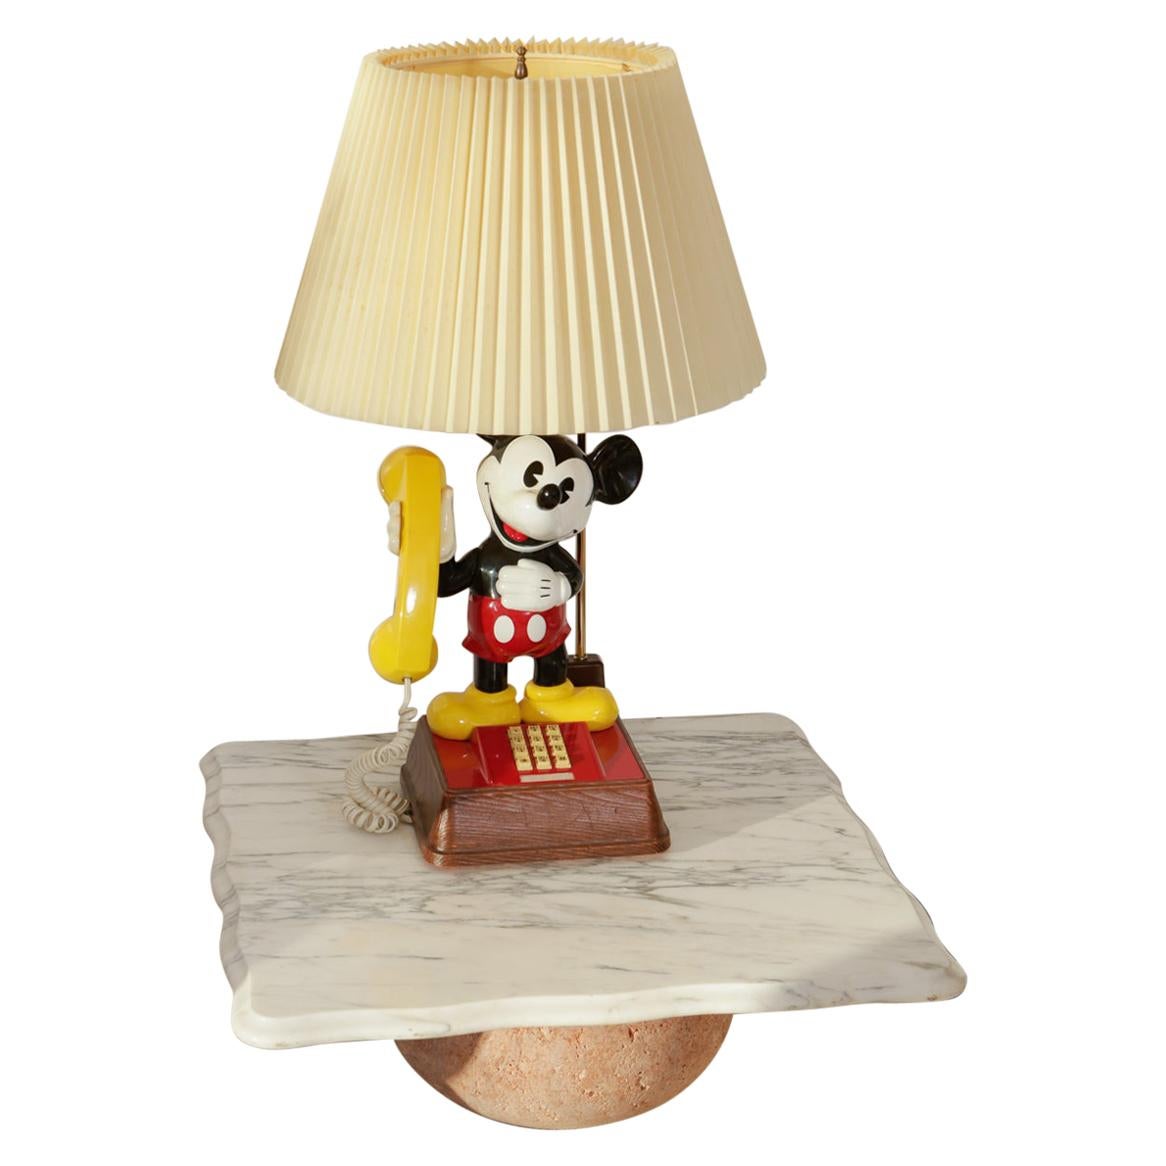 Collectable 1970s Vintage Walt Disney Mickey Mouse Phone Lamp